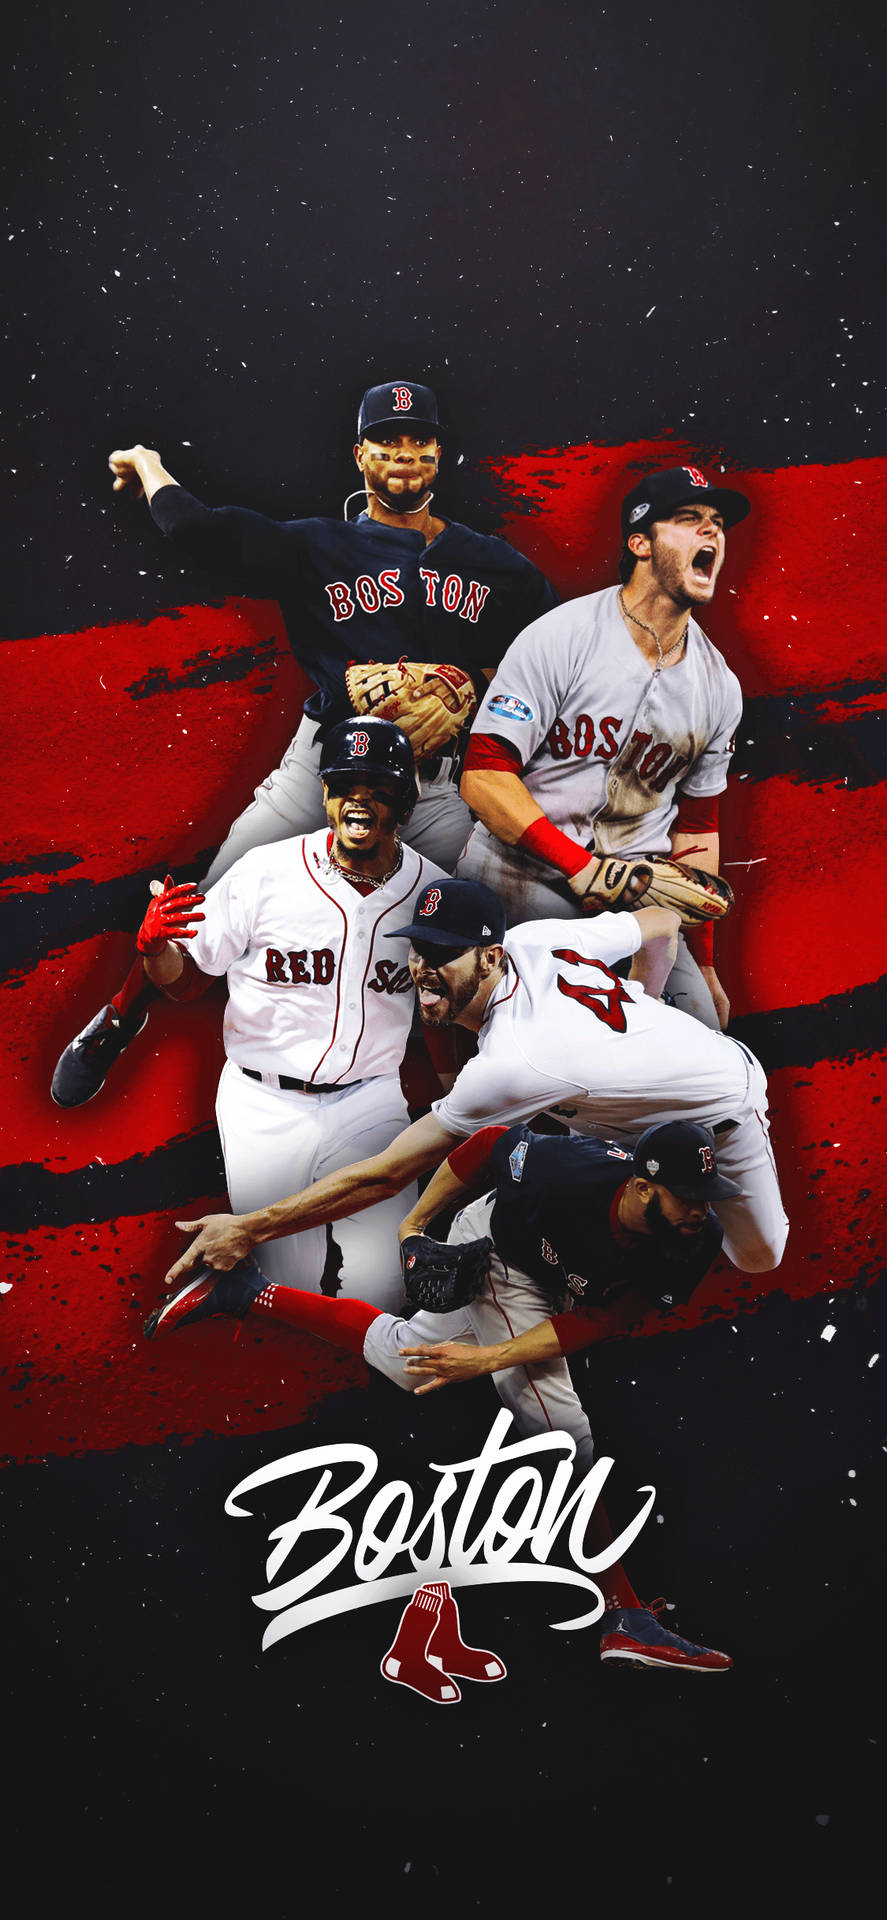 Boston Red Sox Star Players Wallpaper